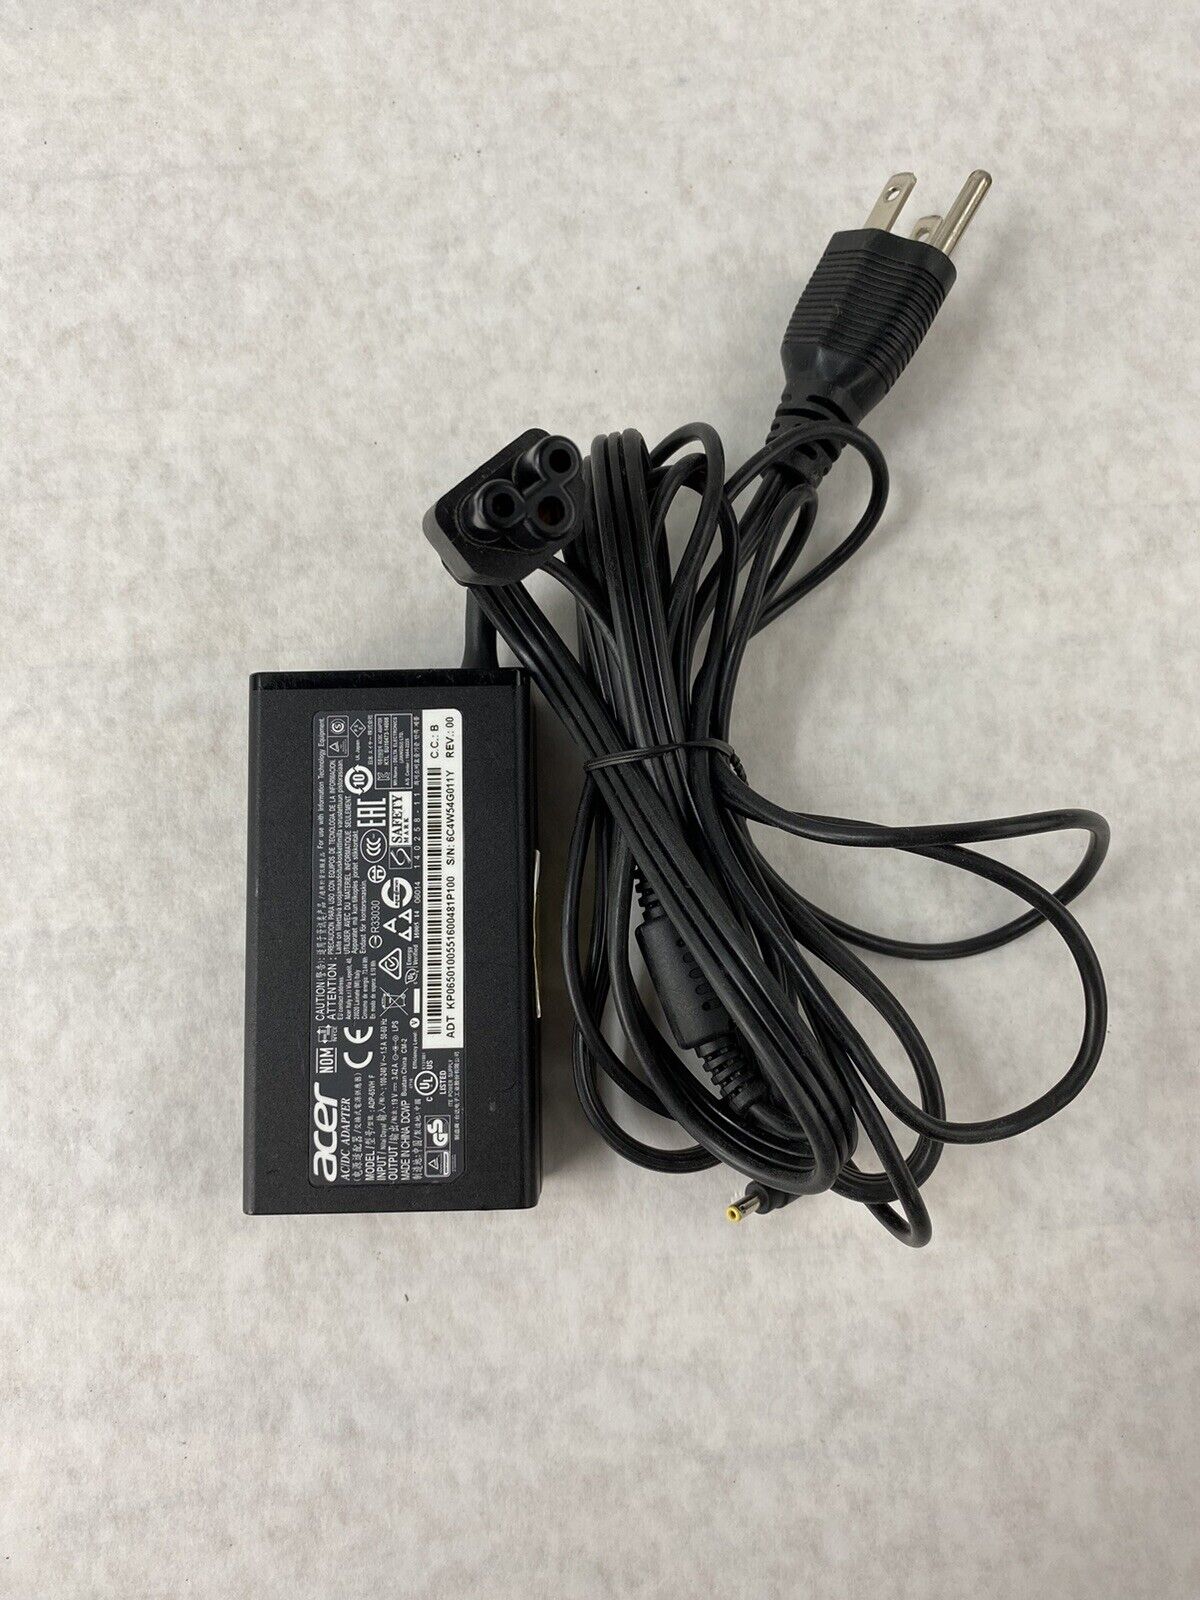 Acer ADP-65VH F 19V 3.42 A Laptop AC Adapter